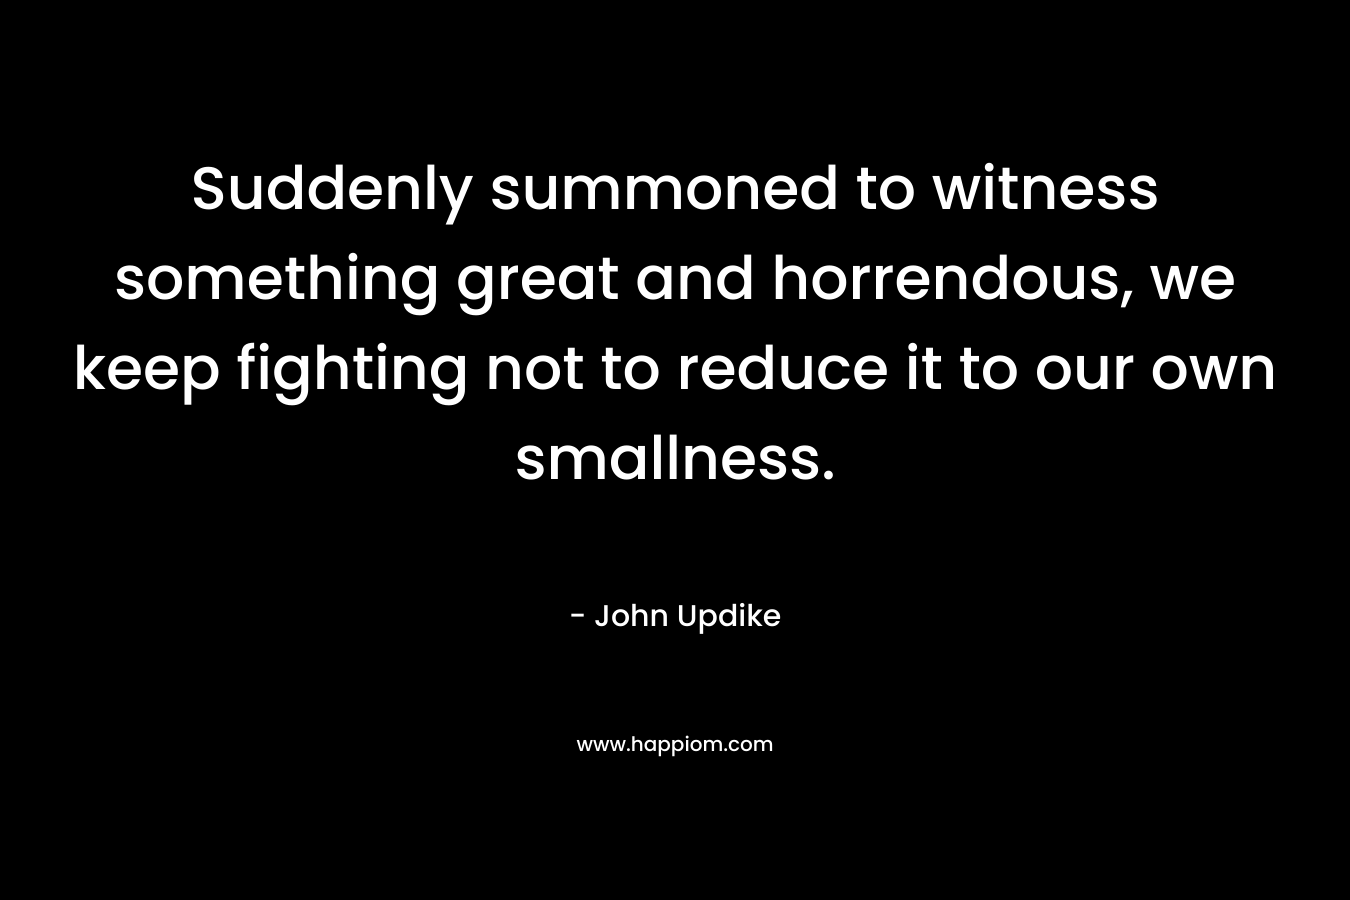 Suddenly summoned to witness something great and horrendous, we keep fighting not to reduce it to our own smallness. – John Updike